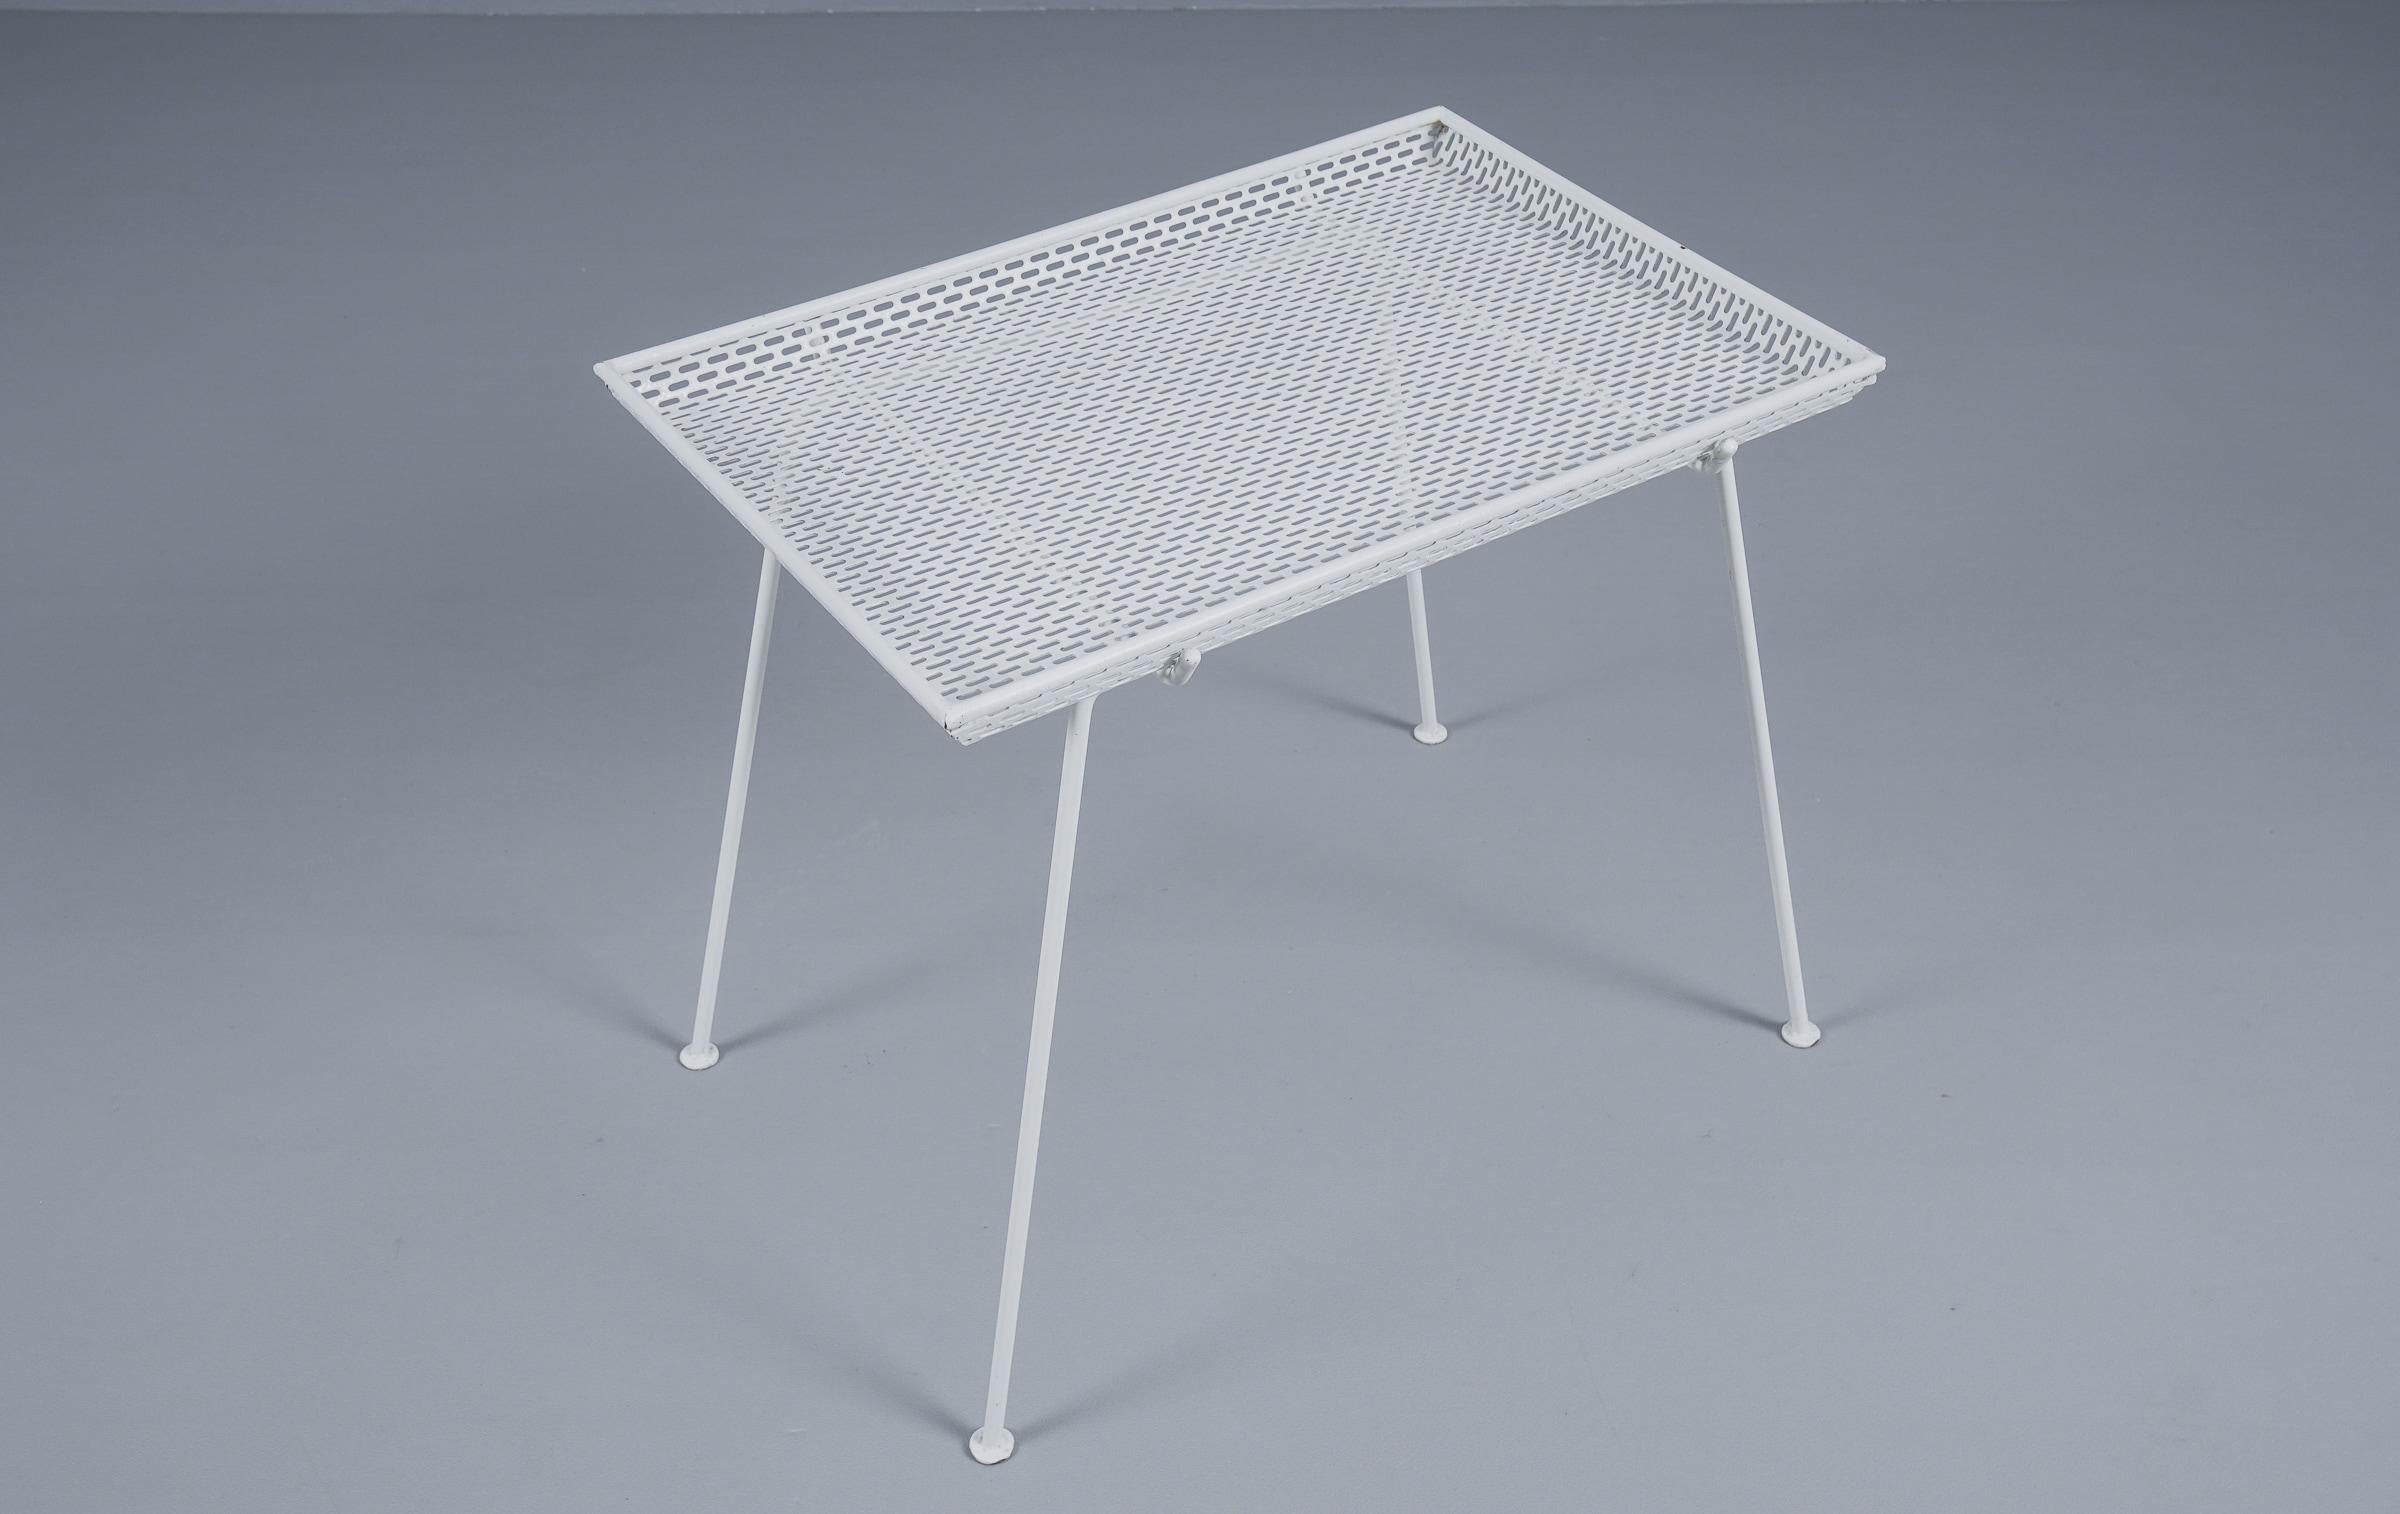 French side table in perforated white lacquered metal with removable tray, 1950s.

Overall good to very good condition with normal light signs of use due to age.